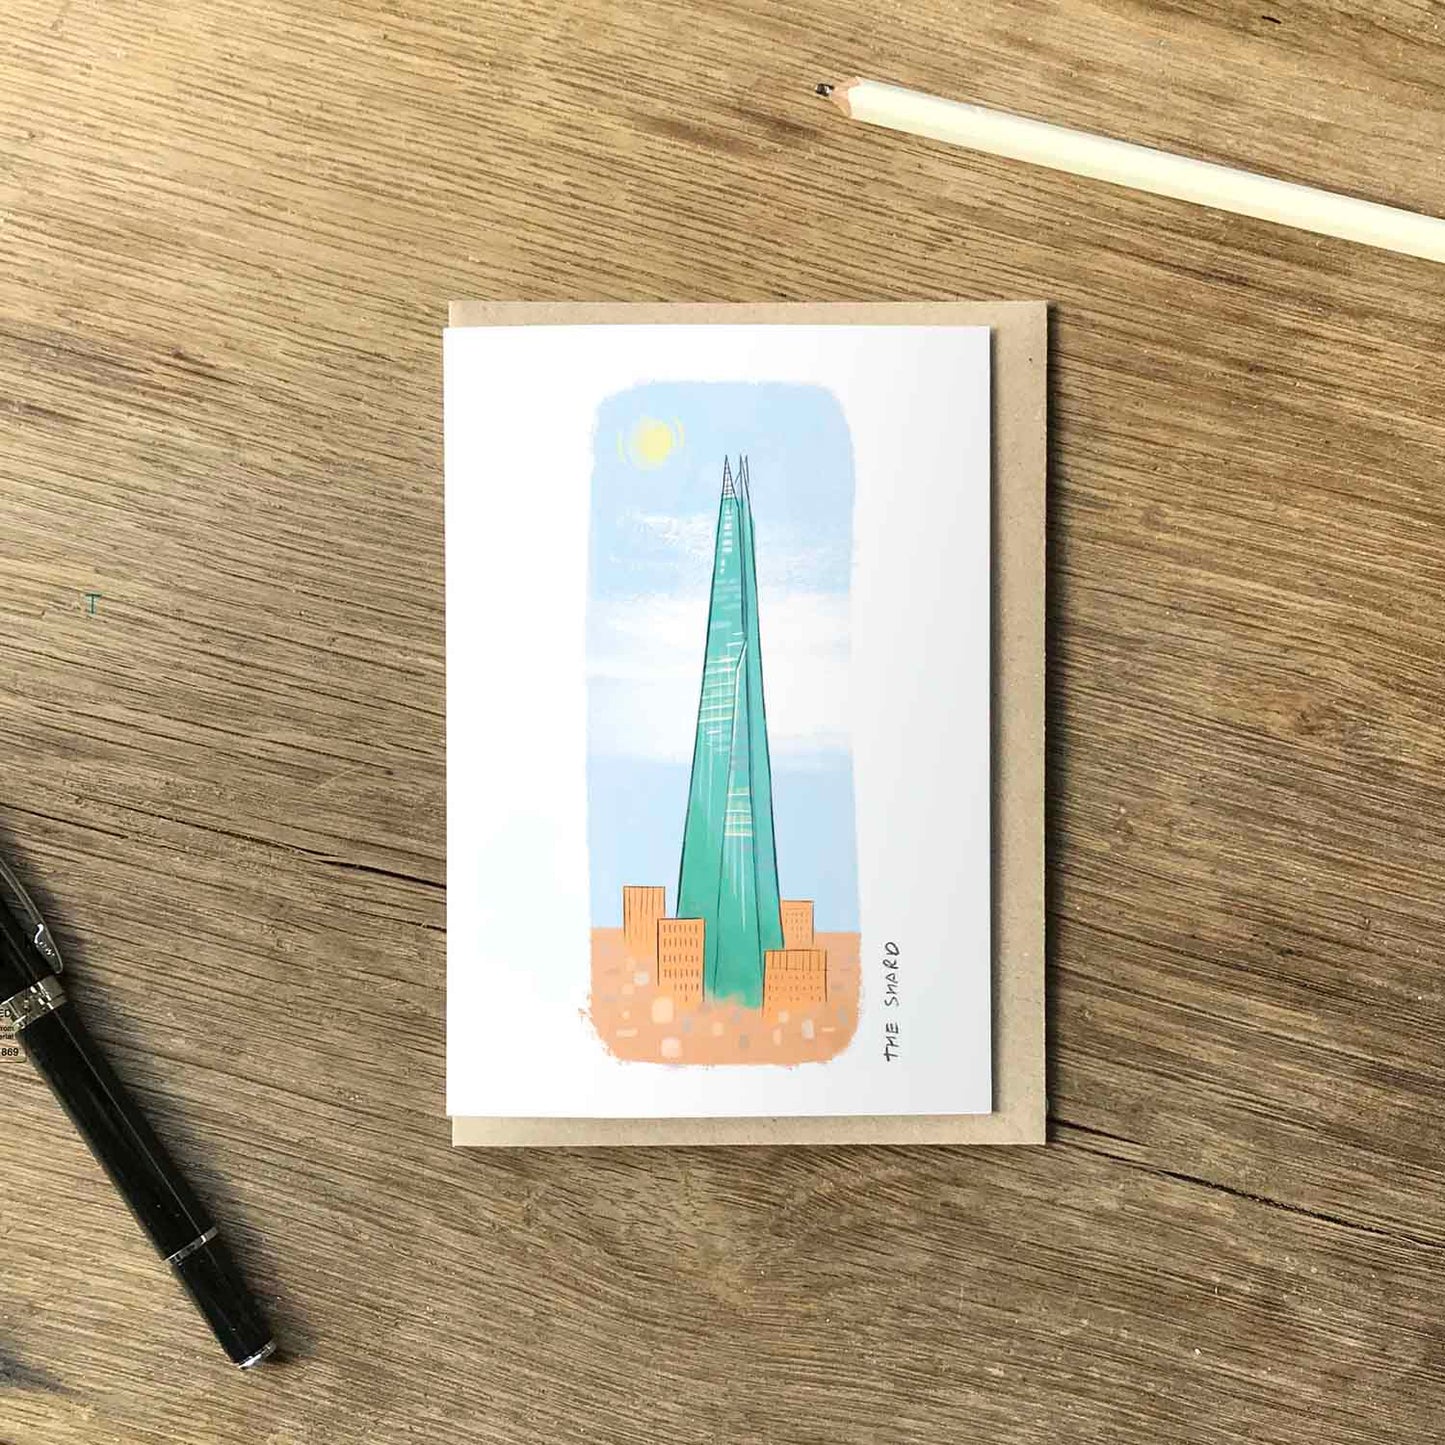 London's The Shard beautifully illustrated on a greeting card from mike green illustration.